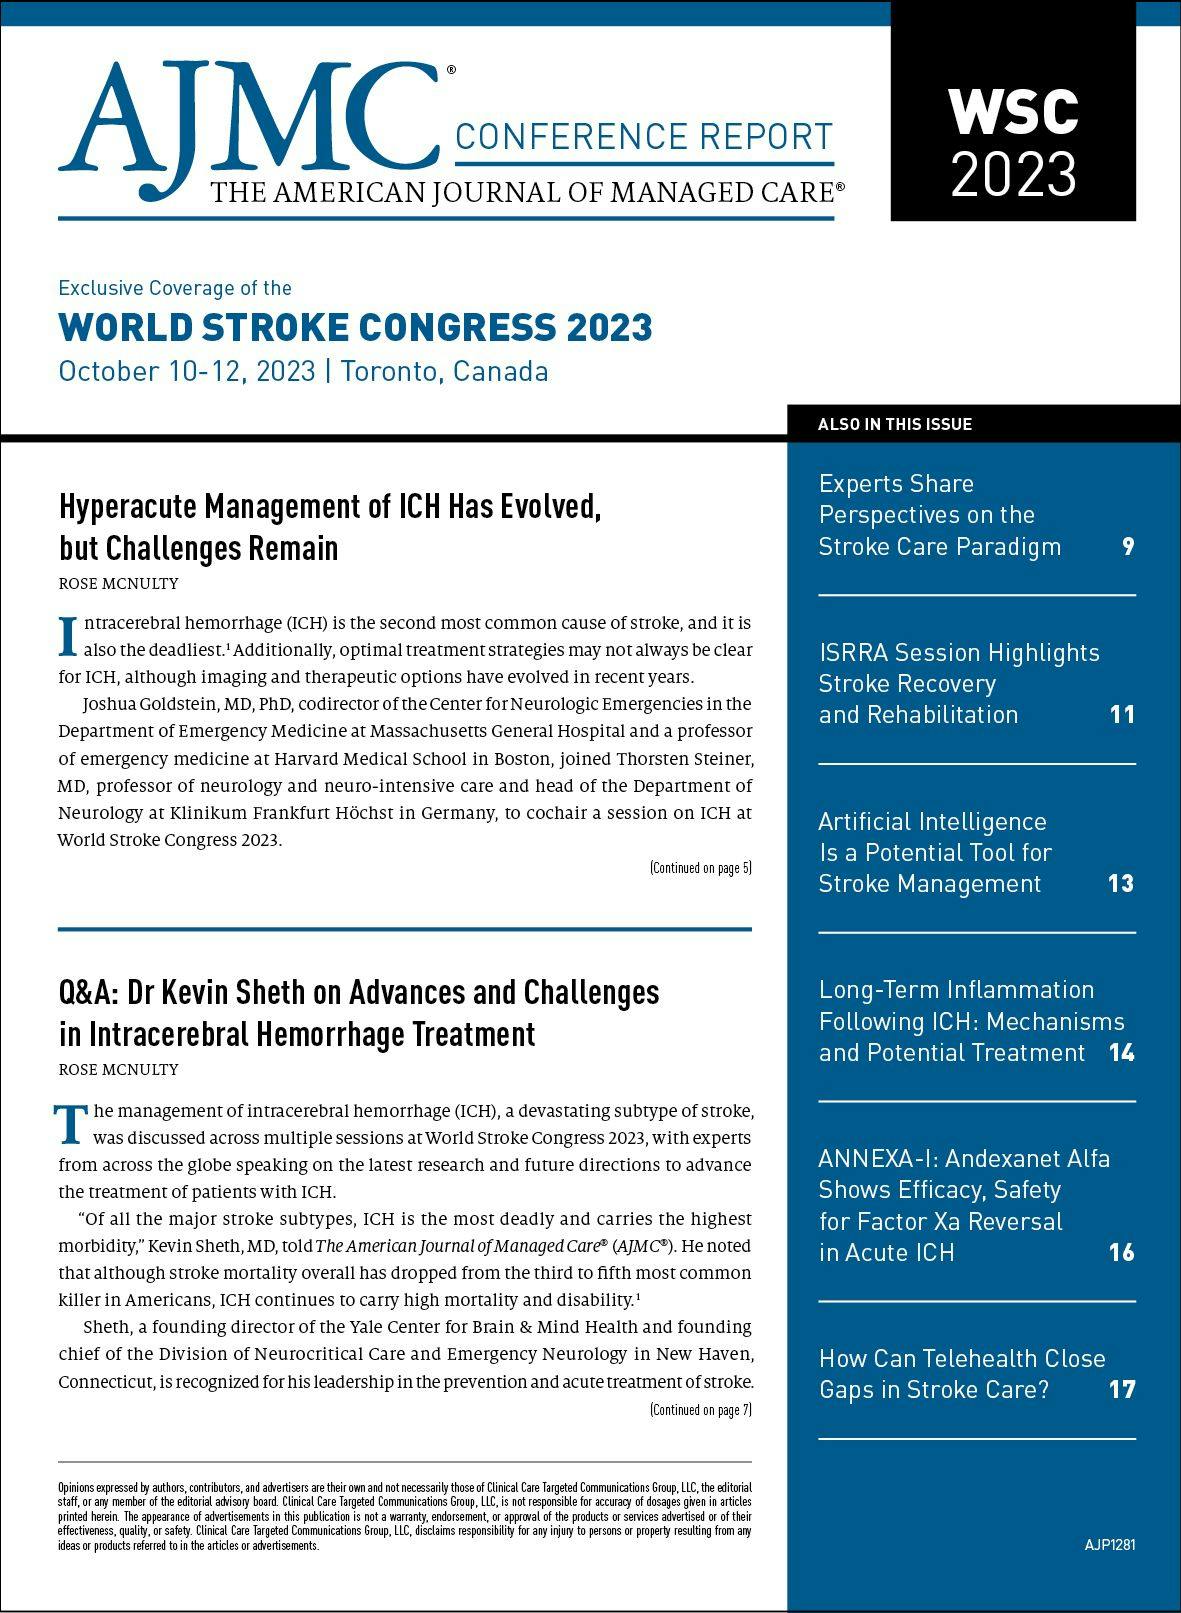 Exclusive Coverage of the World Stroke Congress 2023